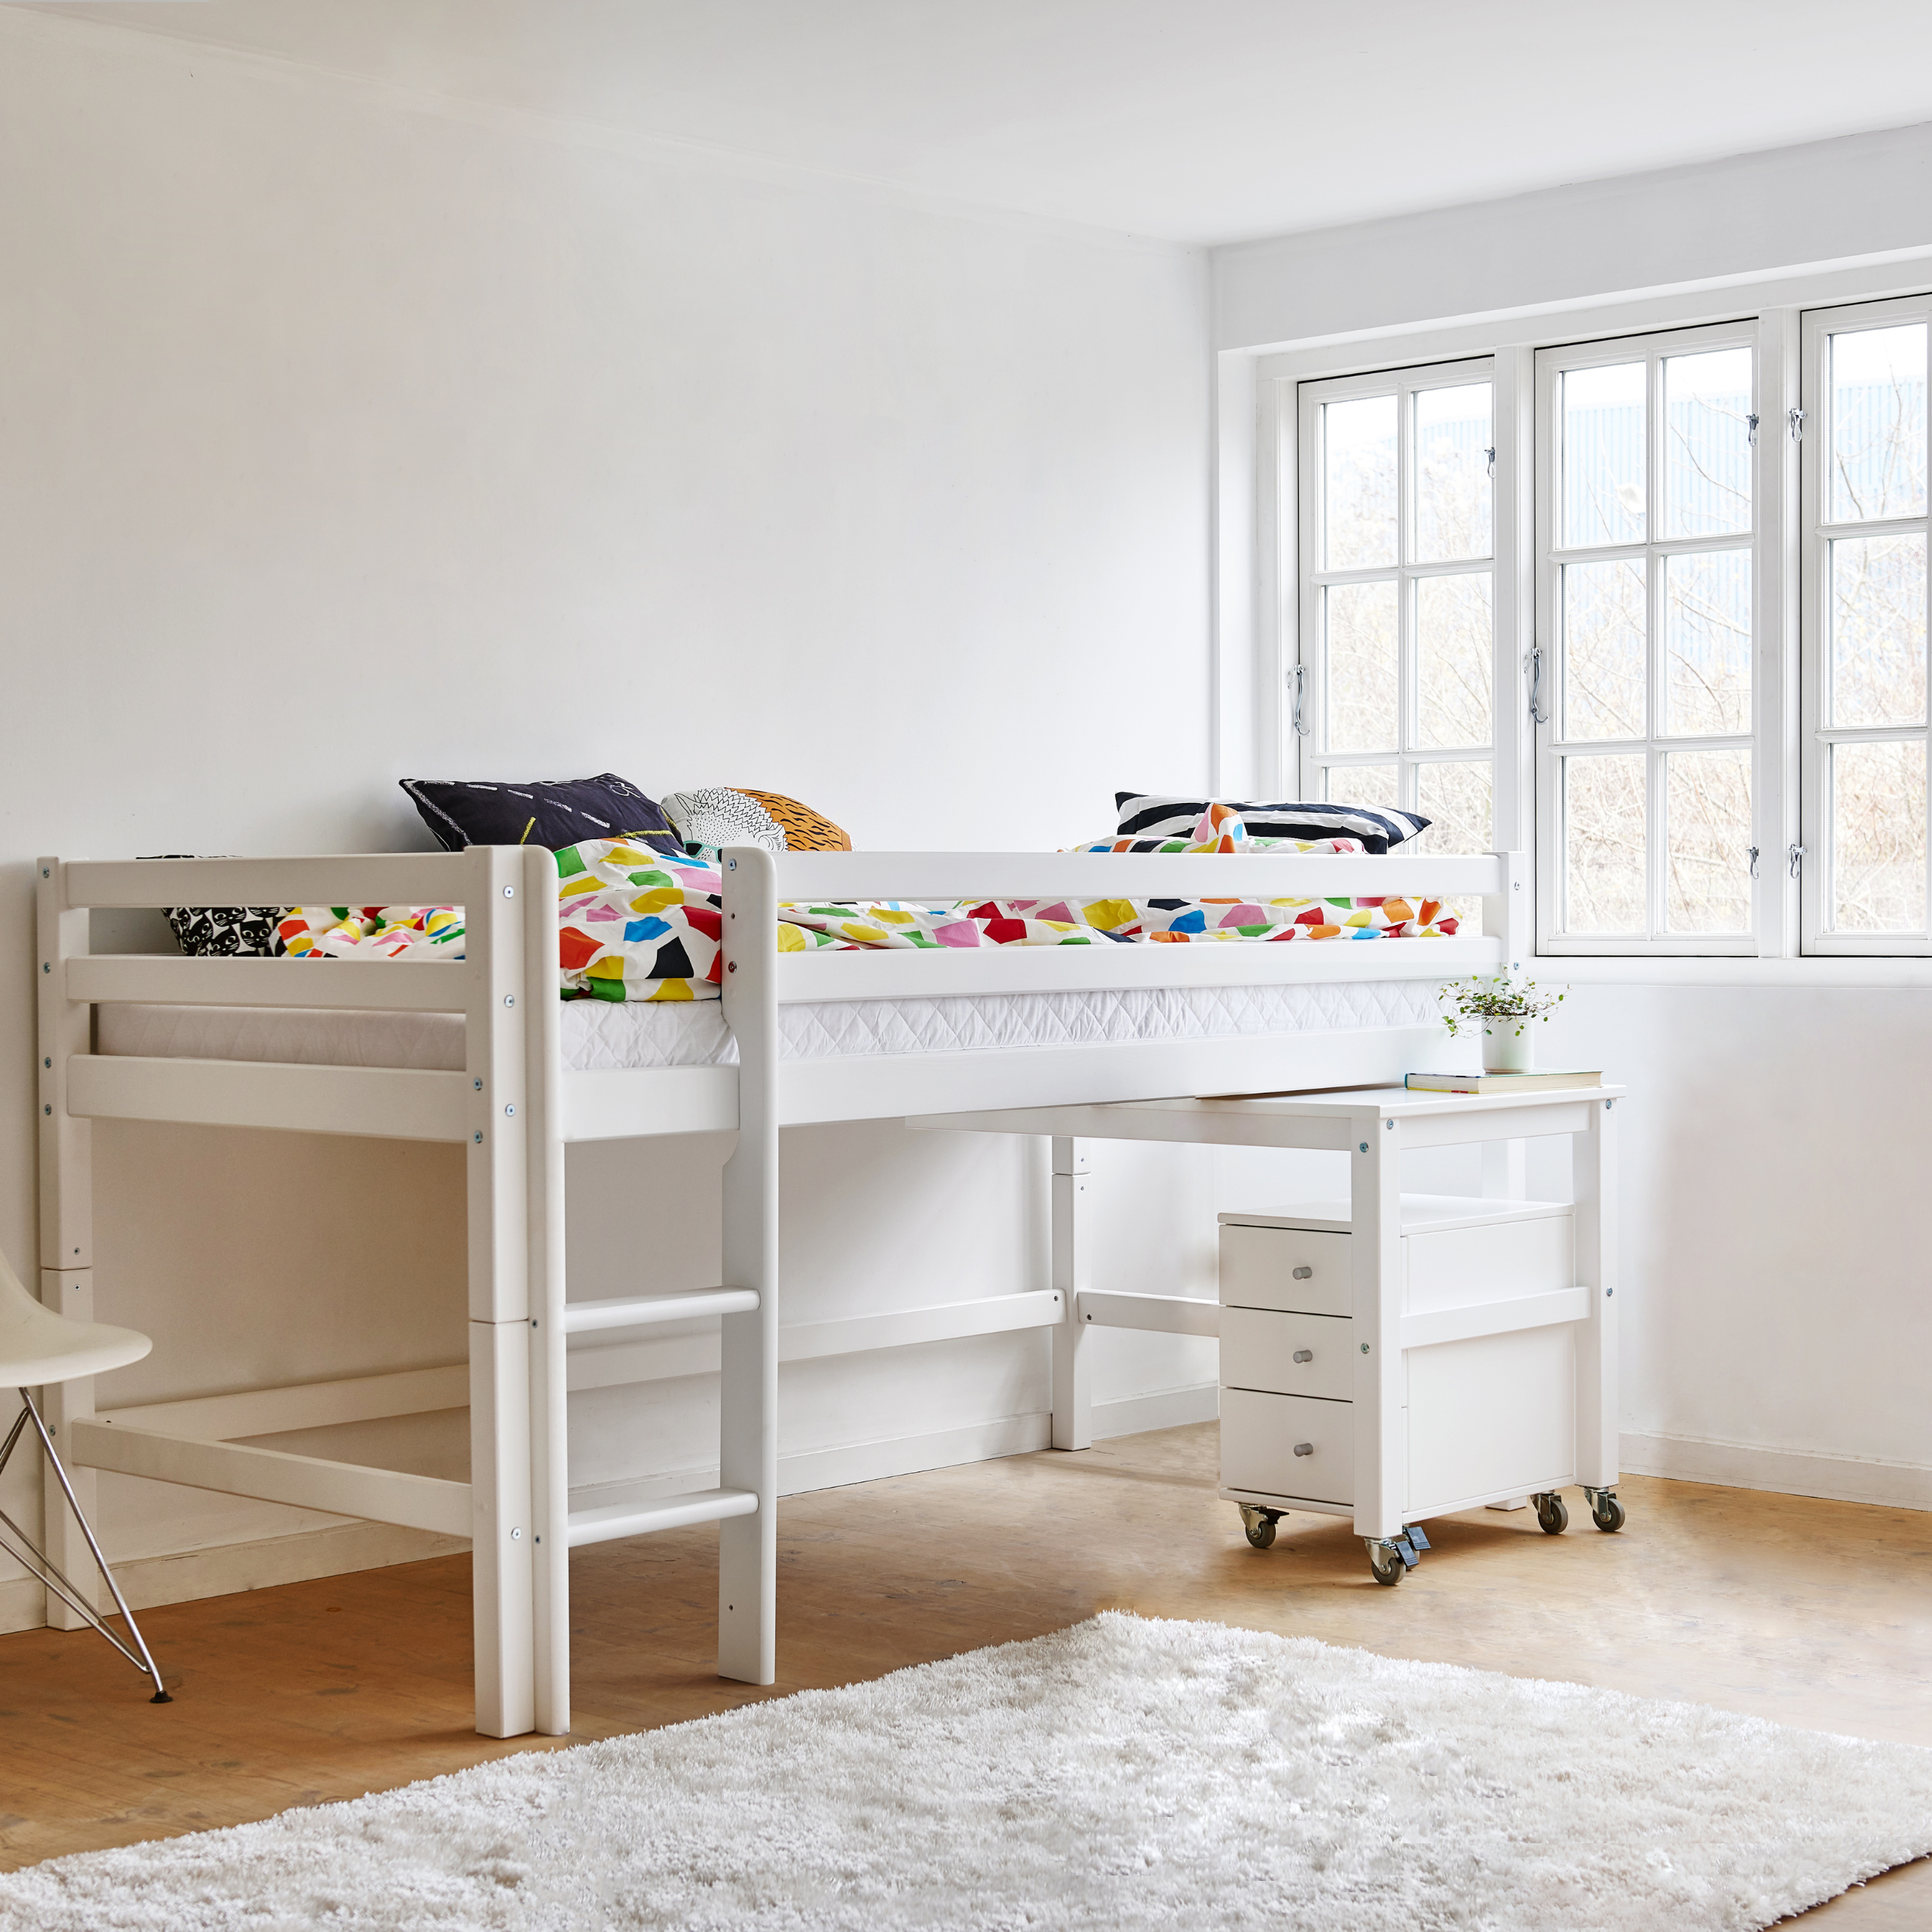 ECO Dream mid sleeper bed with desk